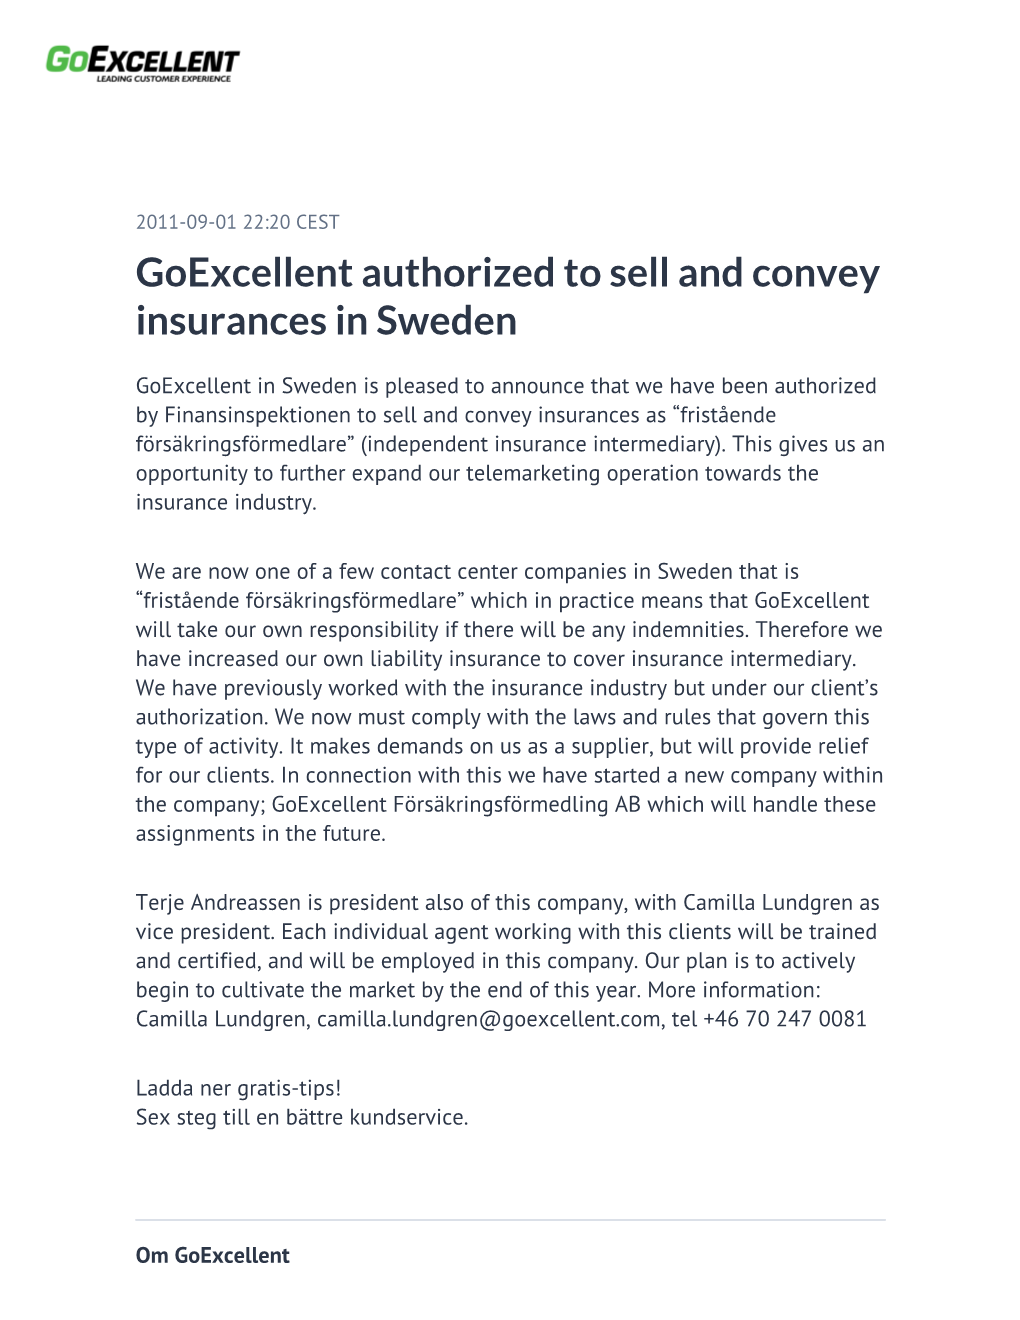 Goexcellent Authorized to Sell and Convey Insurances in Sweden